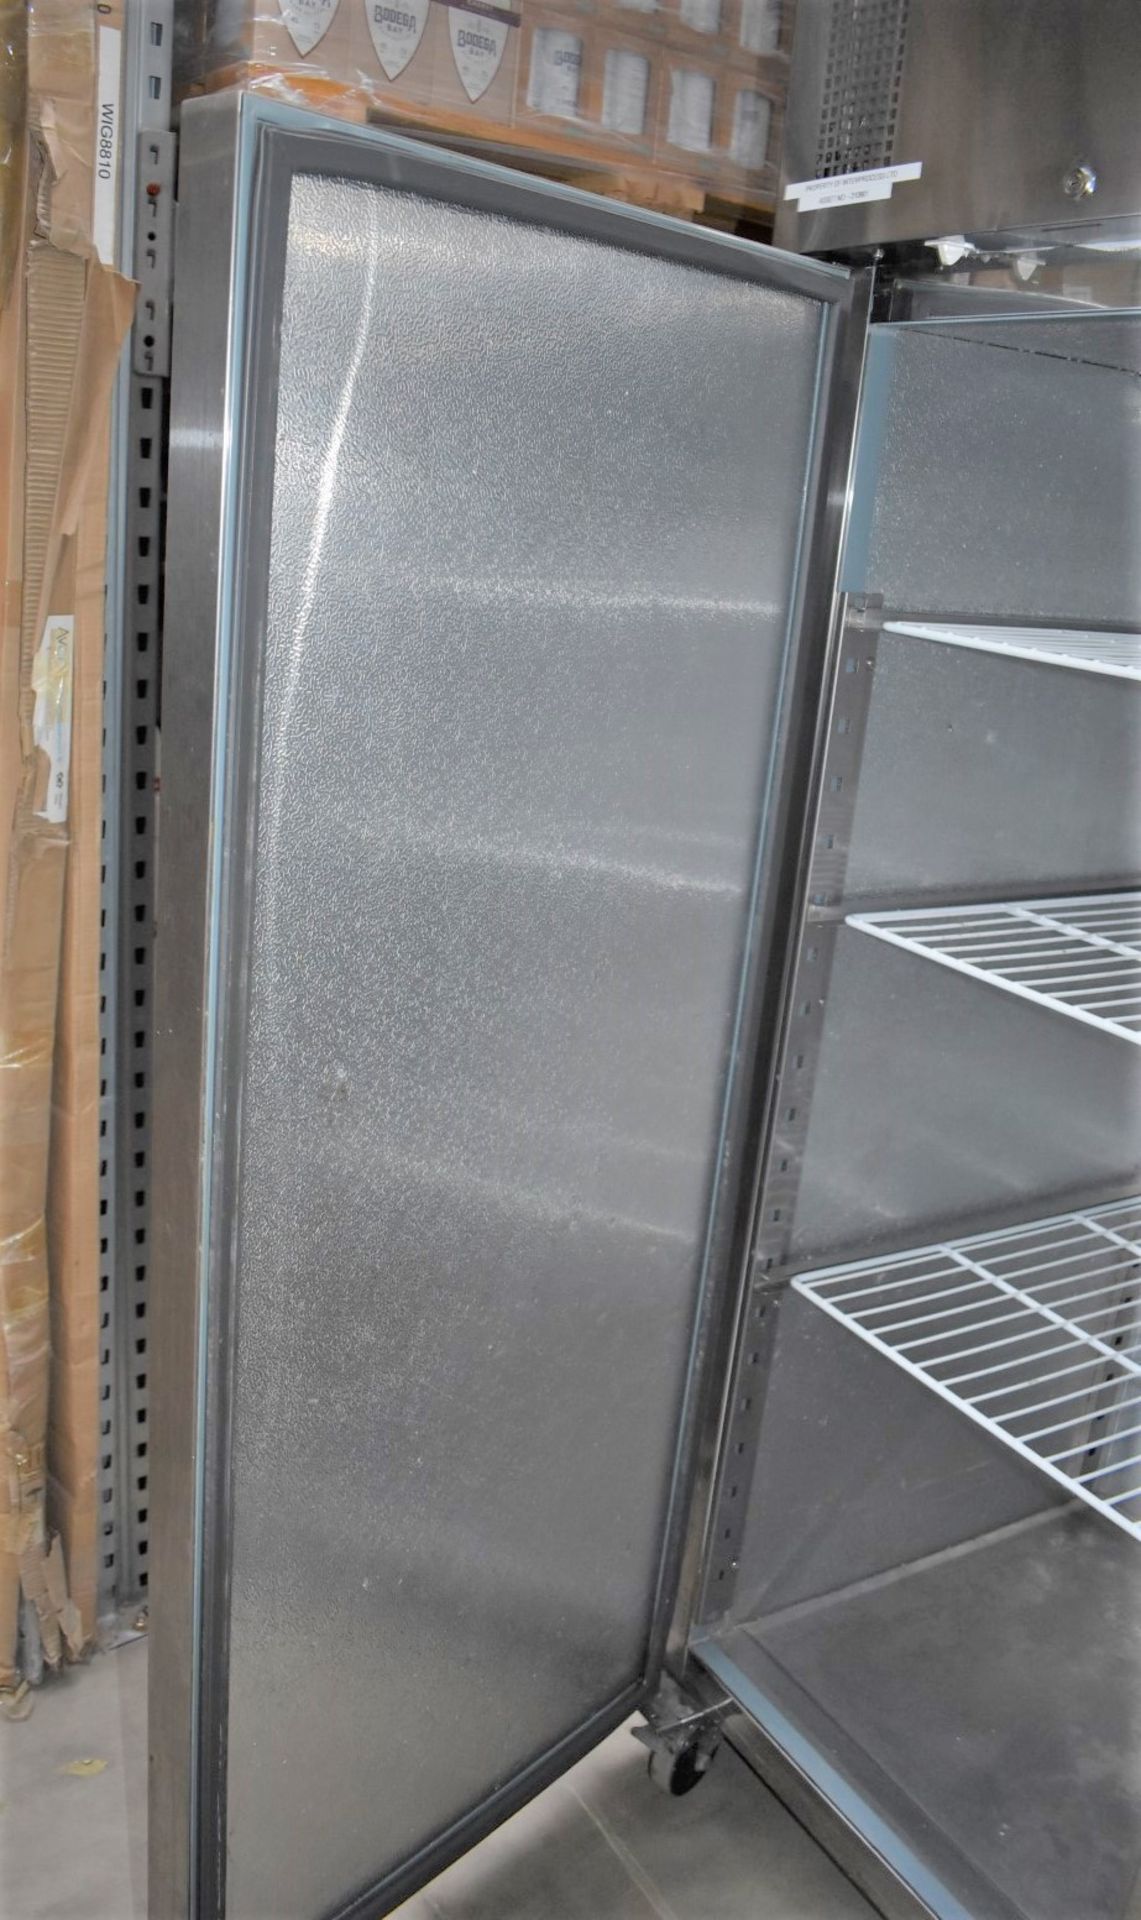 1 x Polar G Series Upright Double Door Refrigerator - Model G594 - Complete With Internal - Image 7 of 18